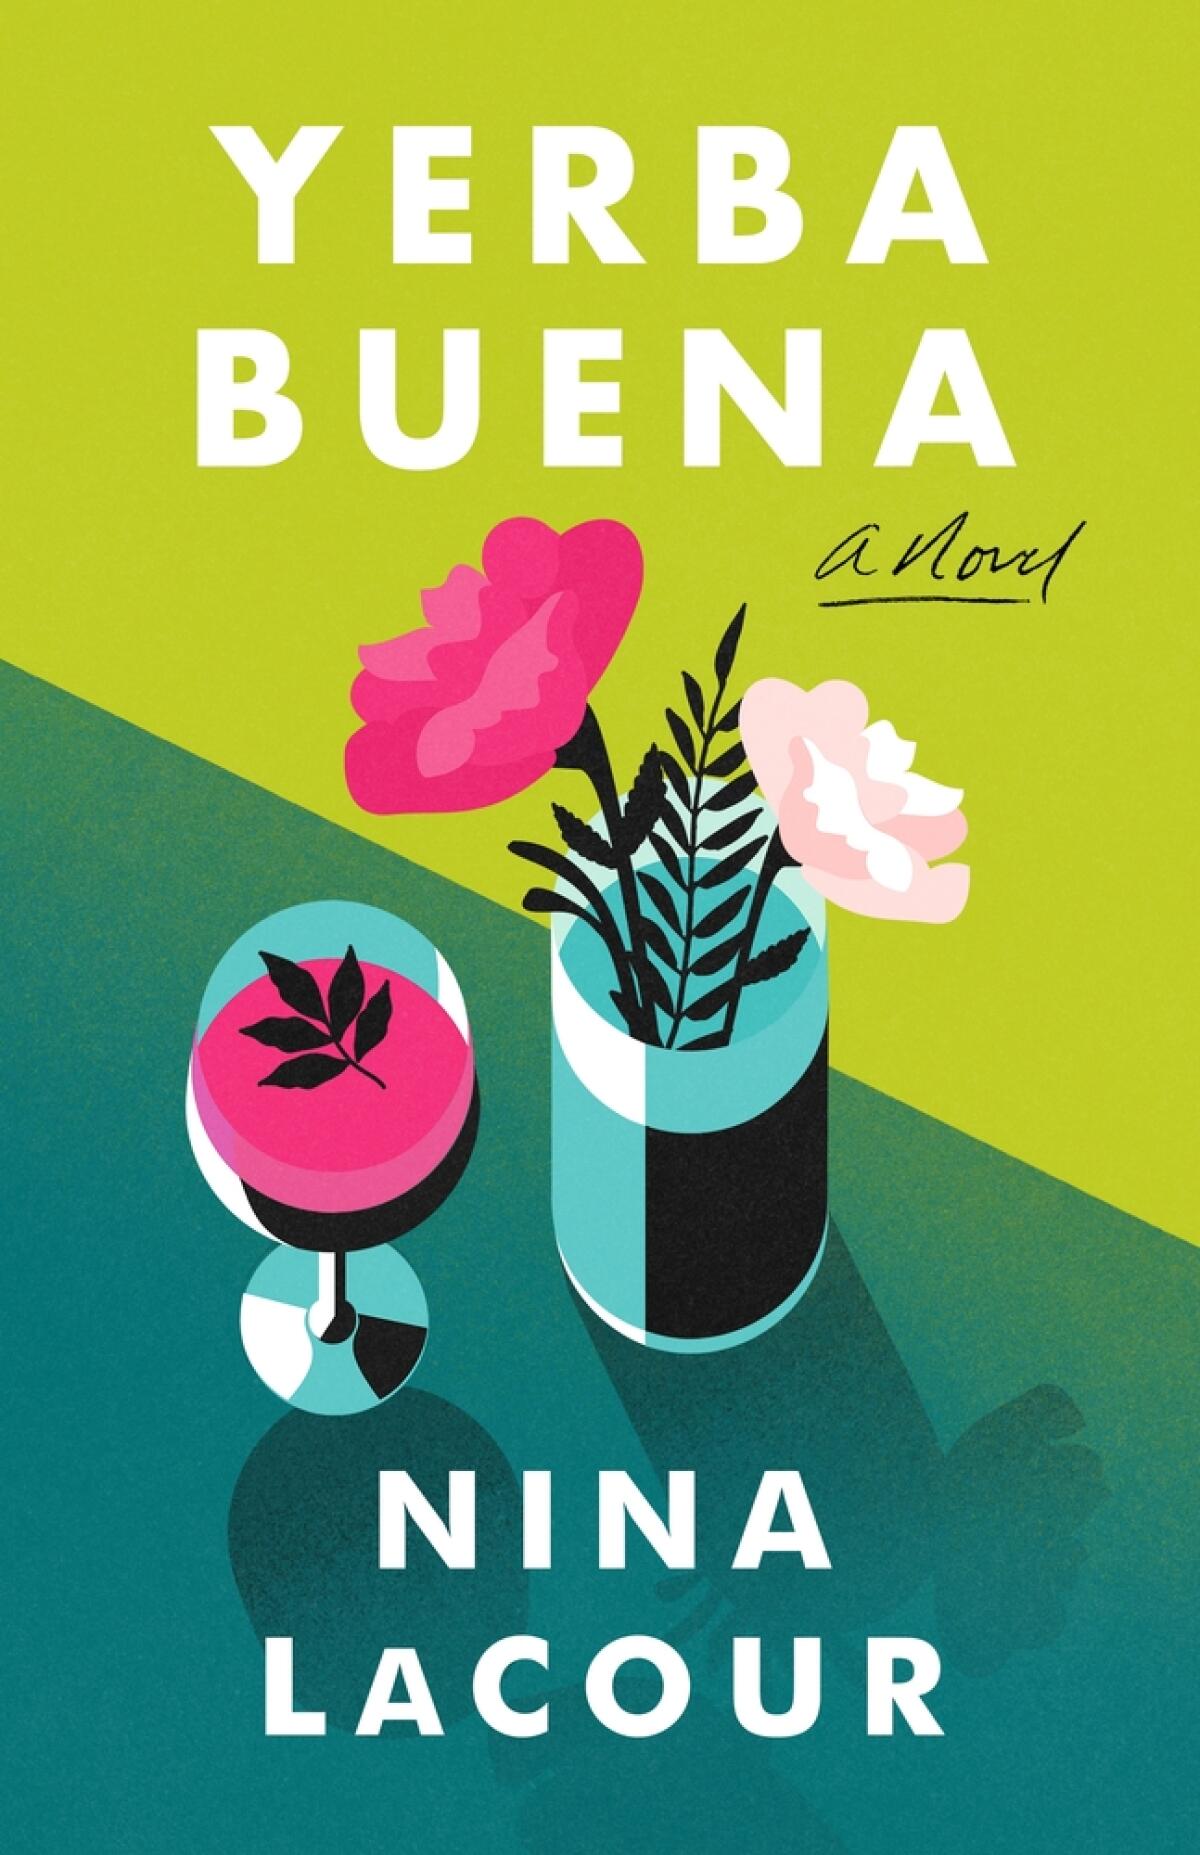 The cover of "Yerba Buena," by Nina LaCour, shows flowers in a vase and a stemmed glass filled with liquid.